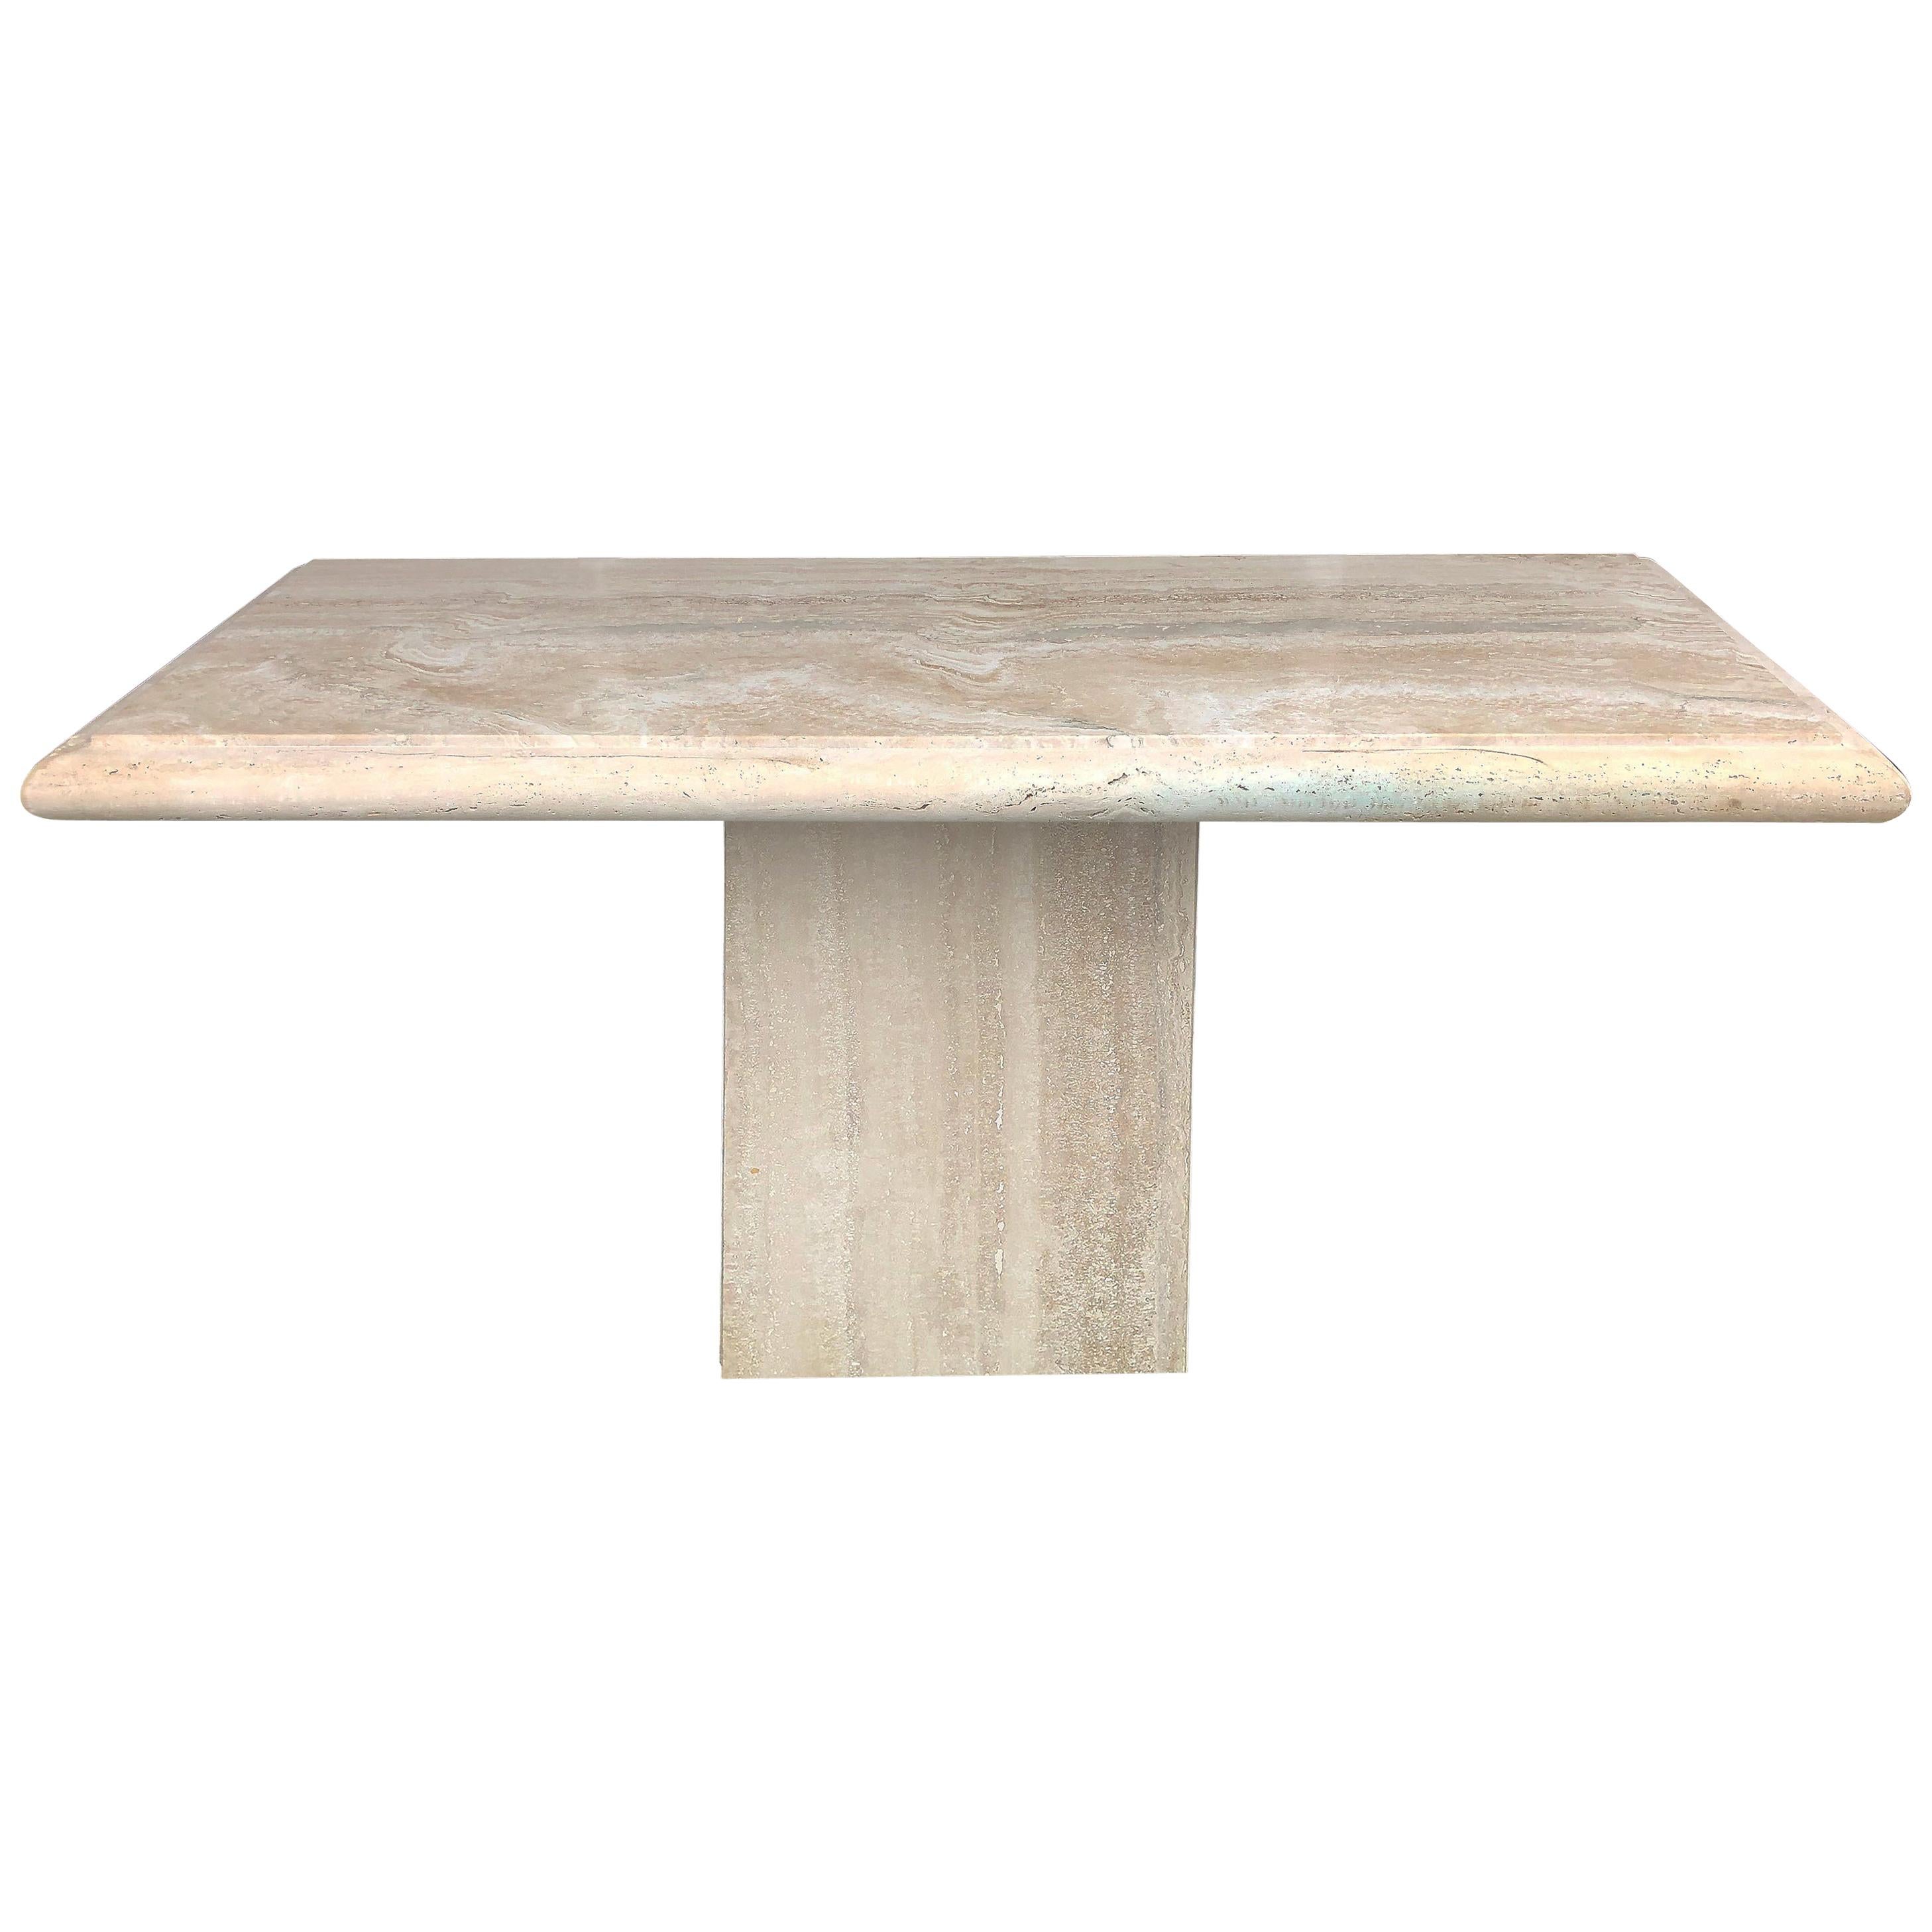 1980s Postmodern Brutalist Travertine Console Table, Italy